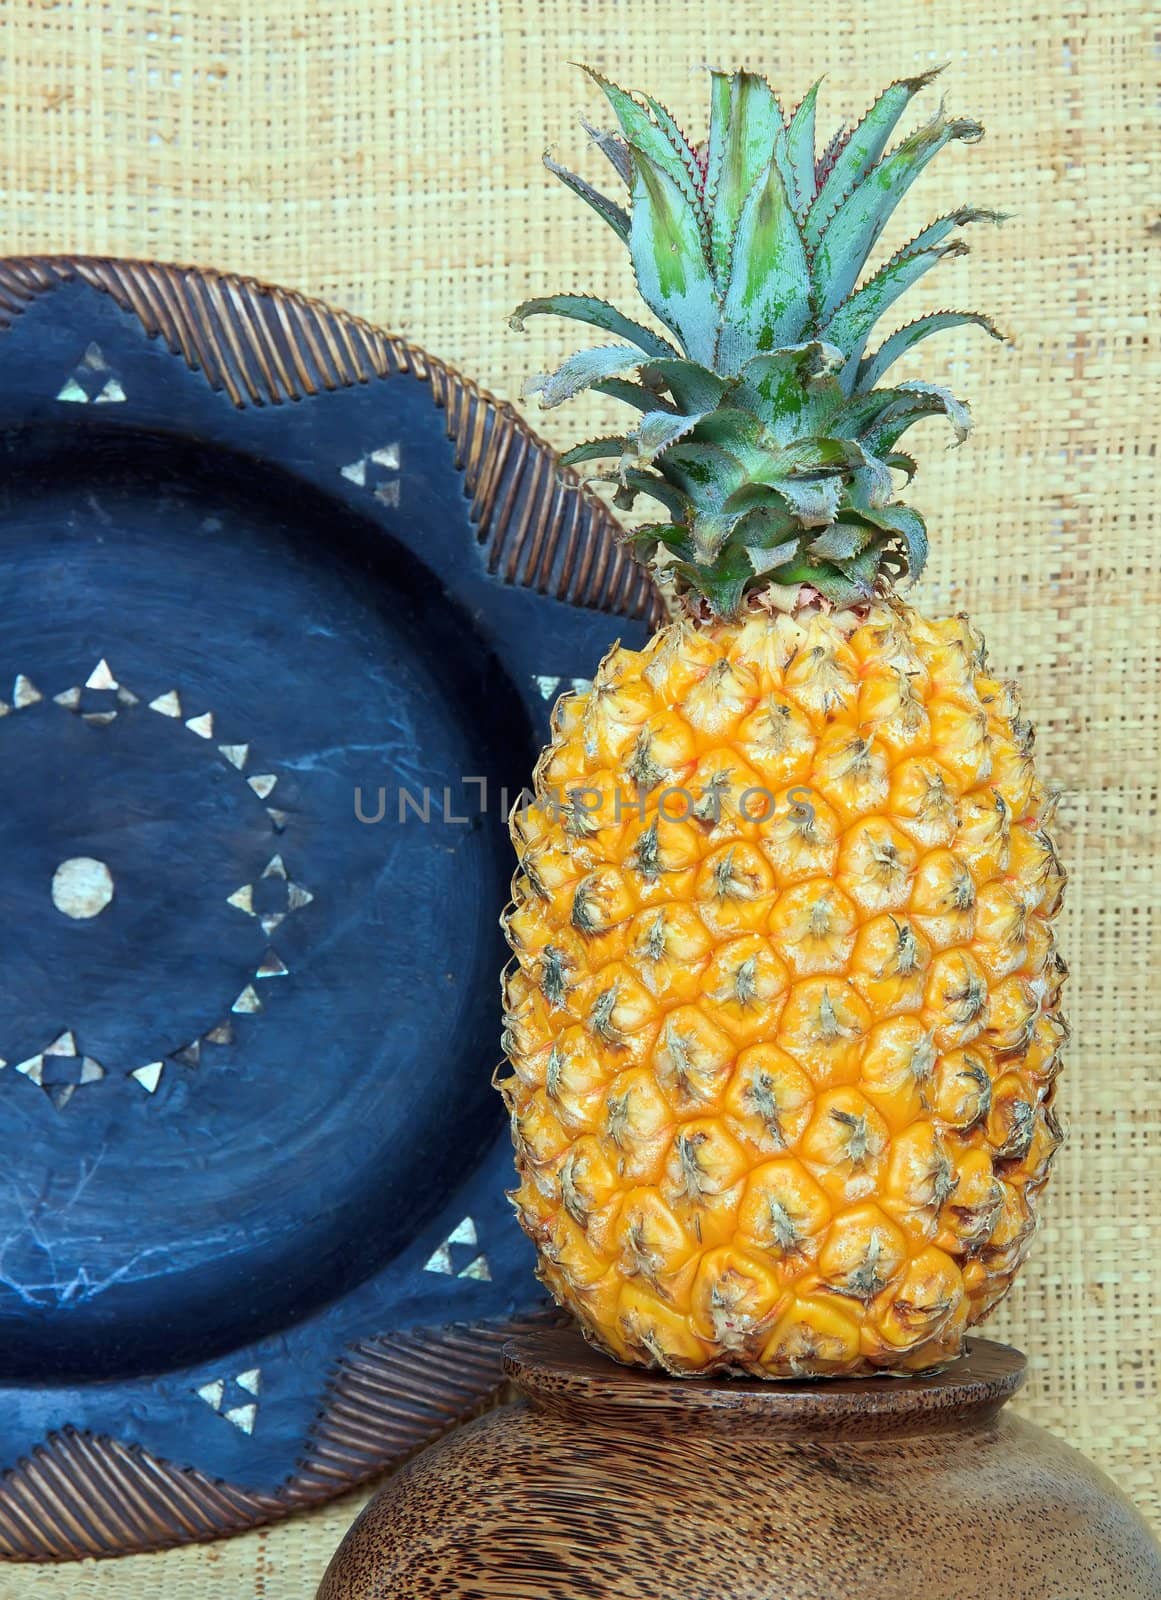 pineapple in a setting of exotic objects